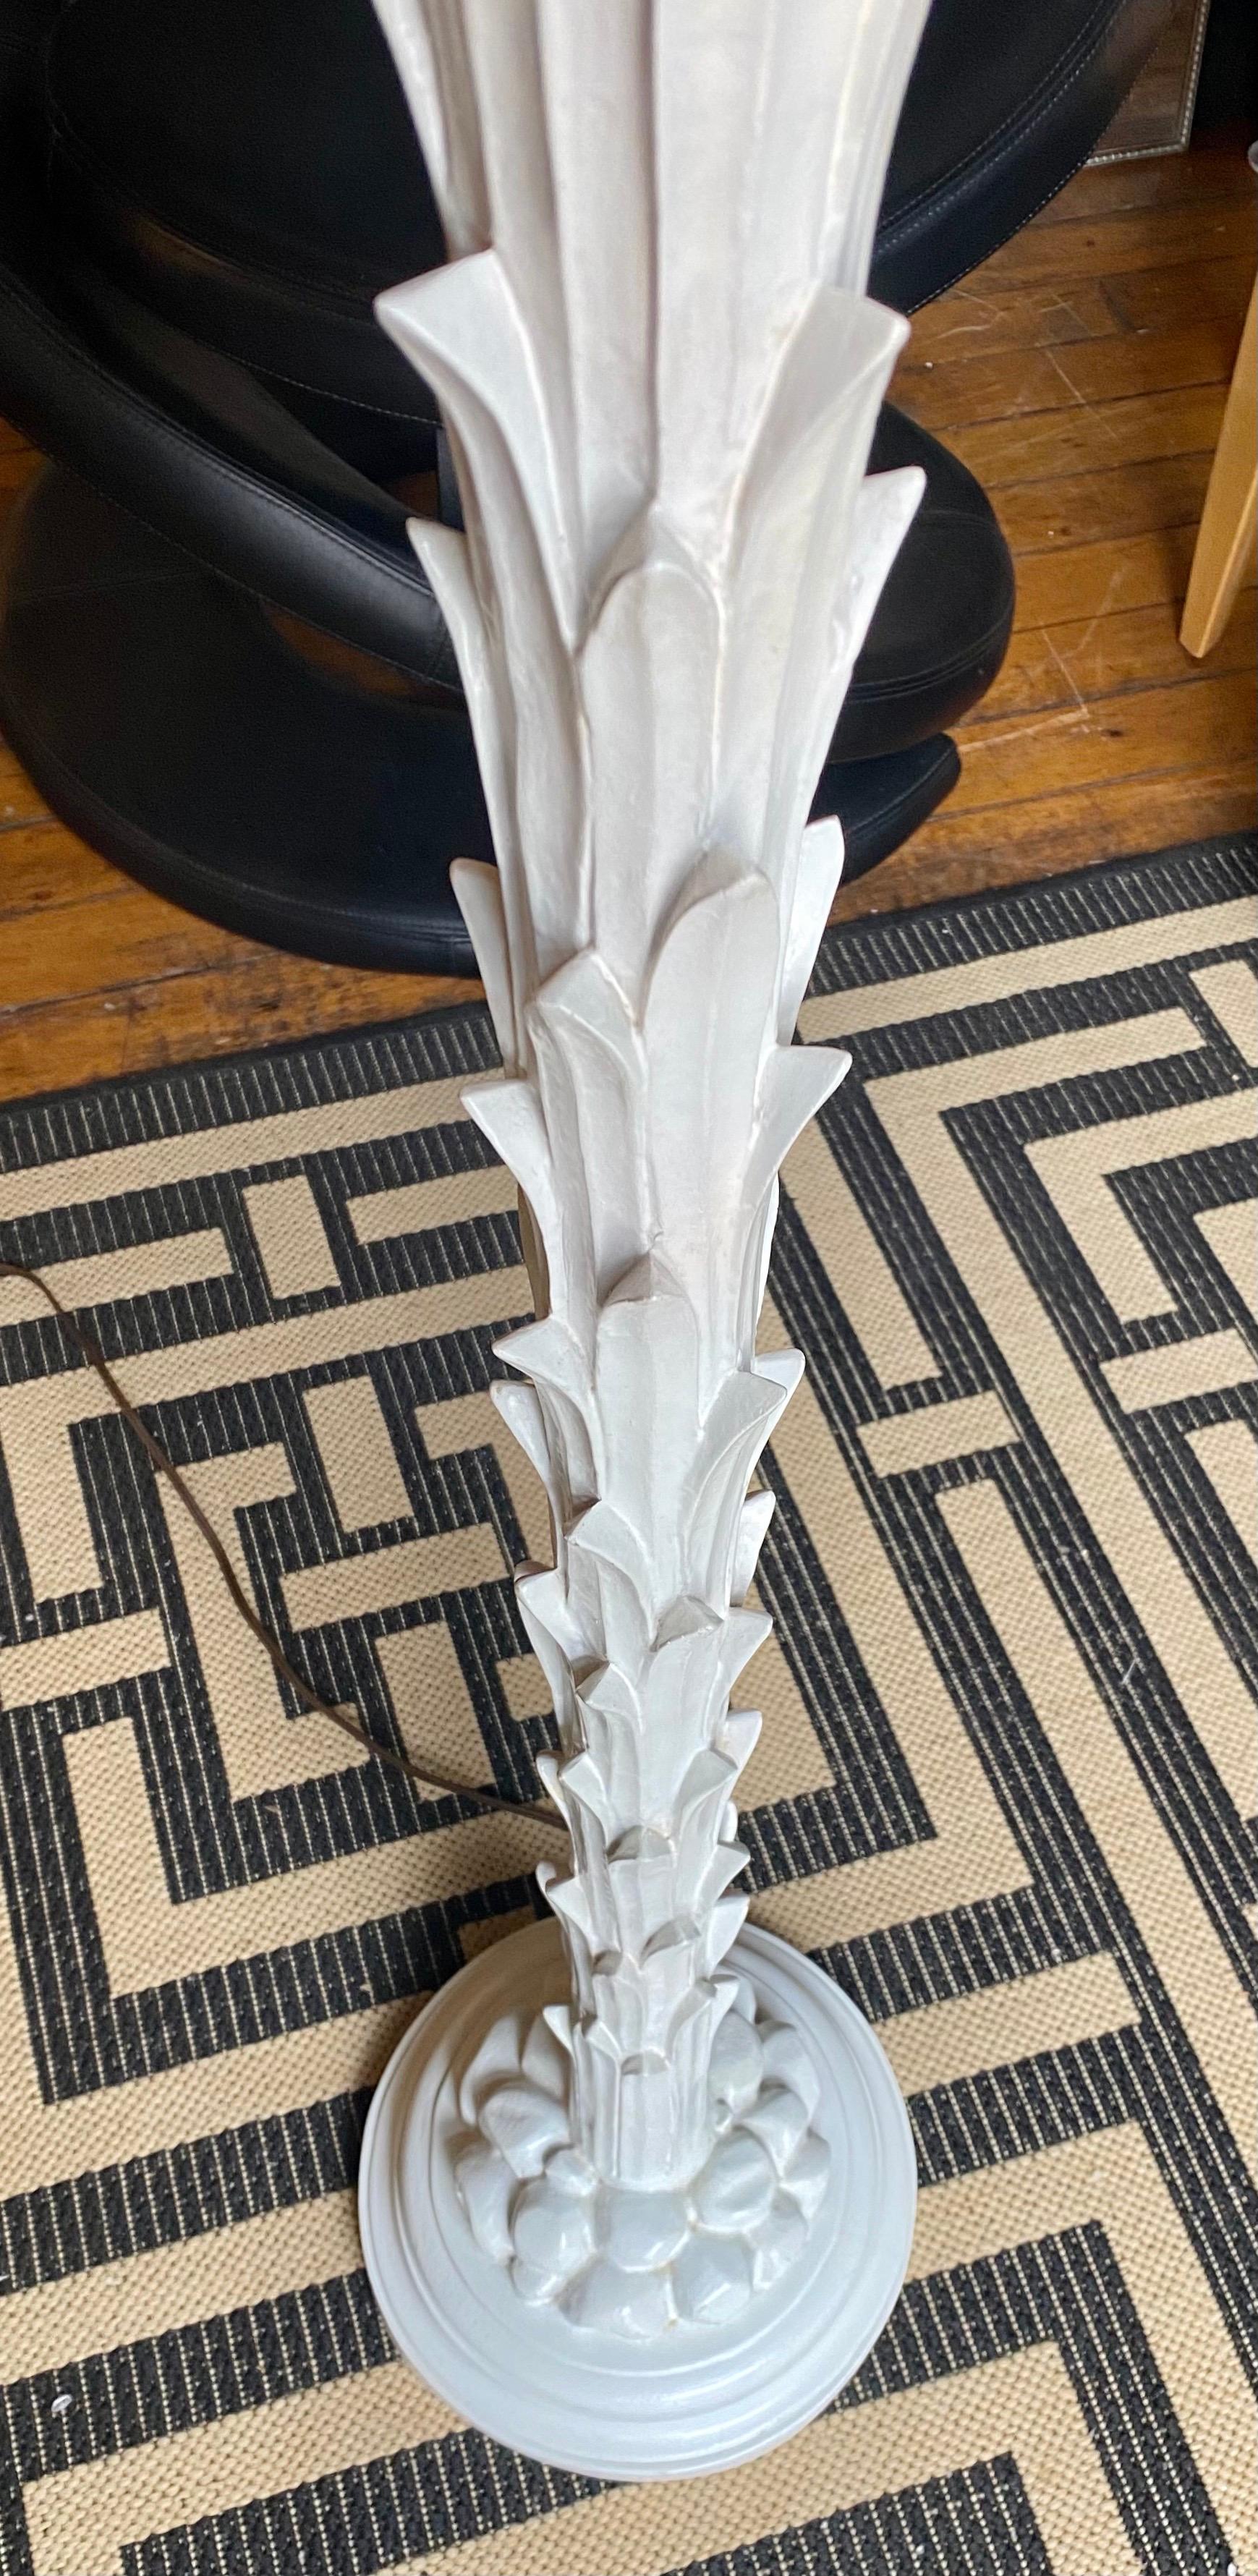 Hollywood Regency Serge Roche Style Plaster Palm Floor Lamp by Chapman, 1970s For Sale 1